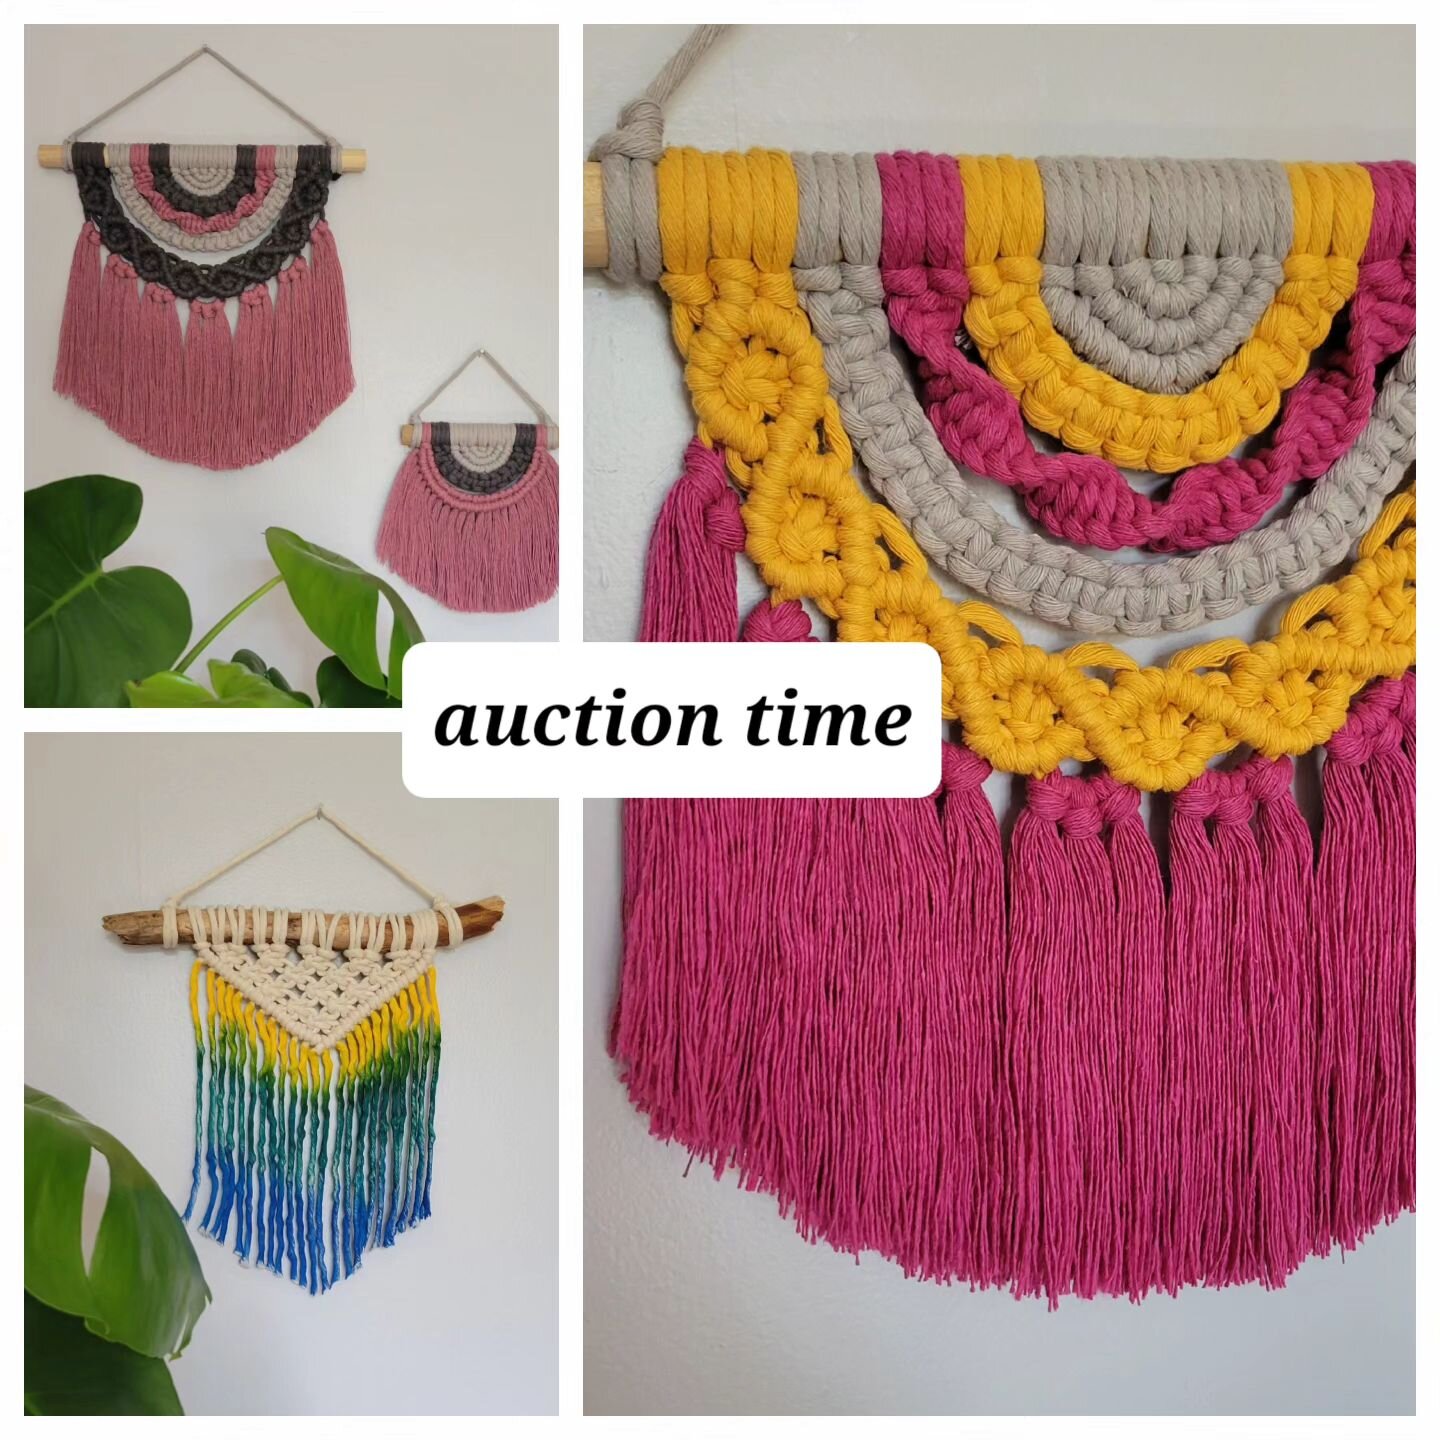 Are y'all interested in another #auction?

I am clearing out some old inventory to make room for the new ✨️

This time, I will have multiple items available with a starting bid and a &quot;buy now&quot; price? 

Sound good? Starting on Monday at 6pm 